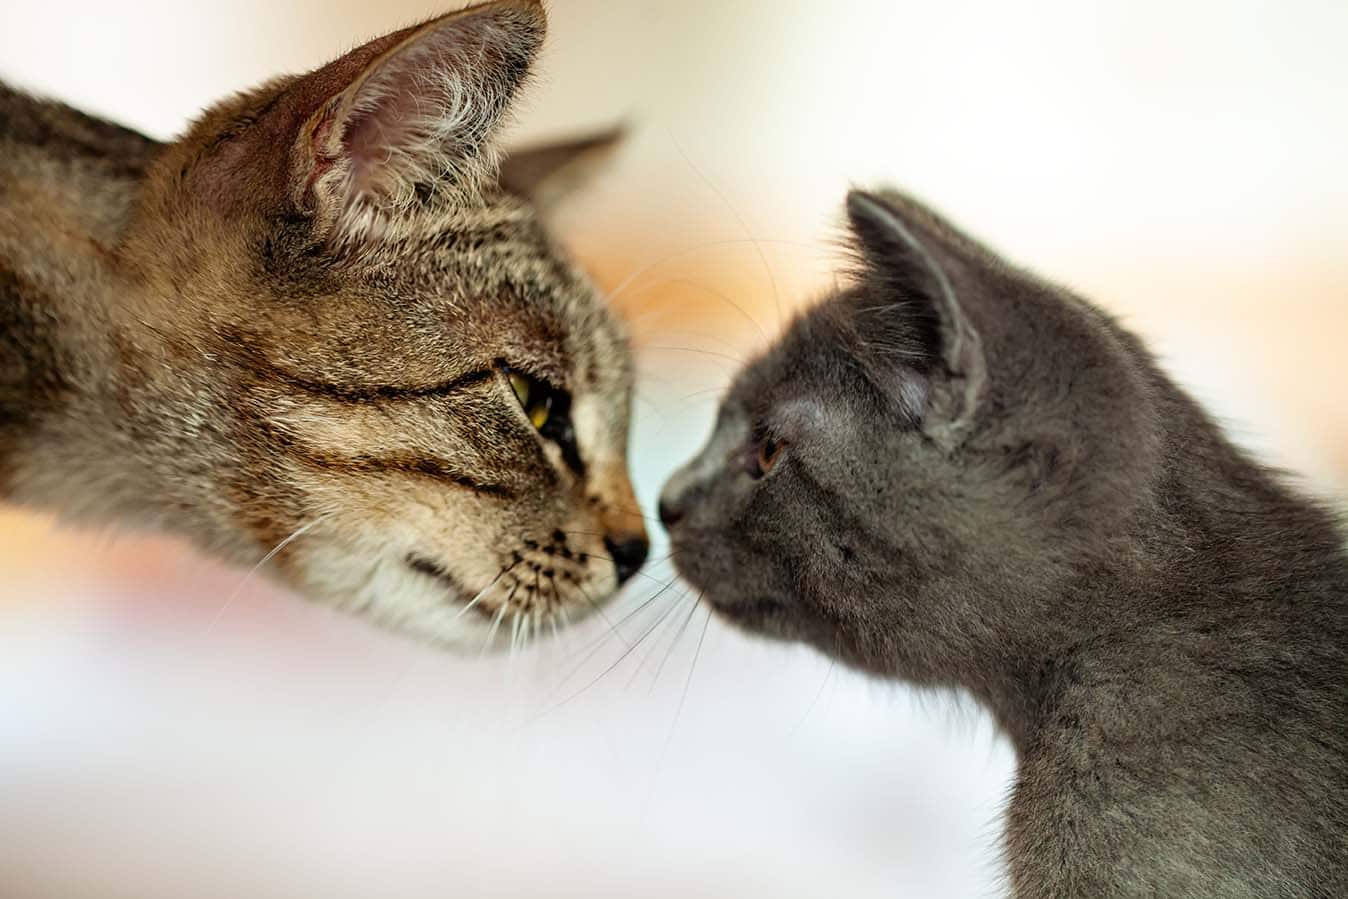 Kitten and adult cat touching noses